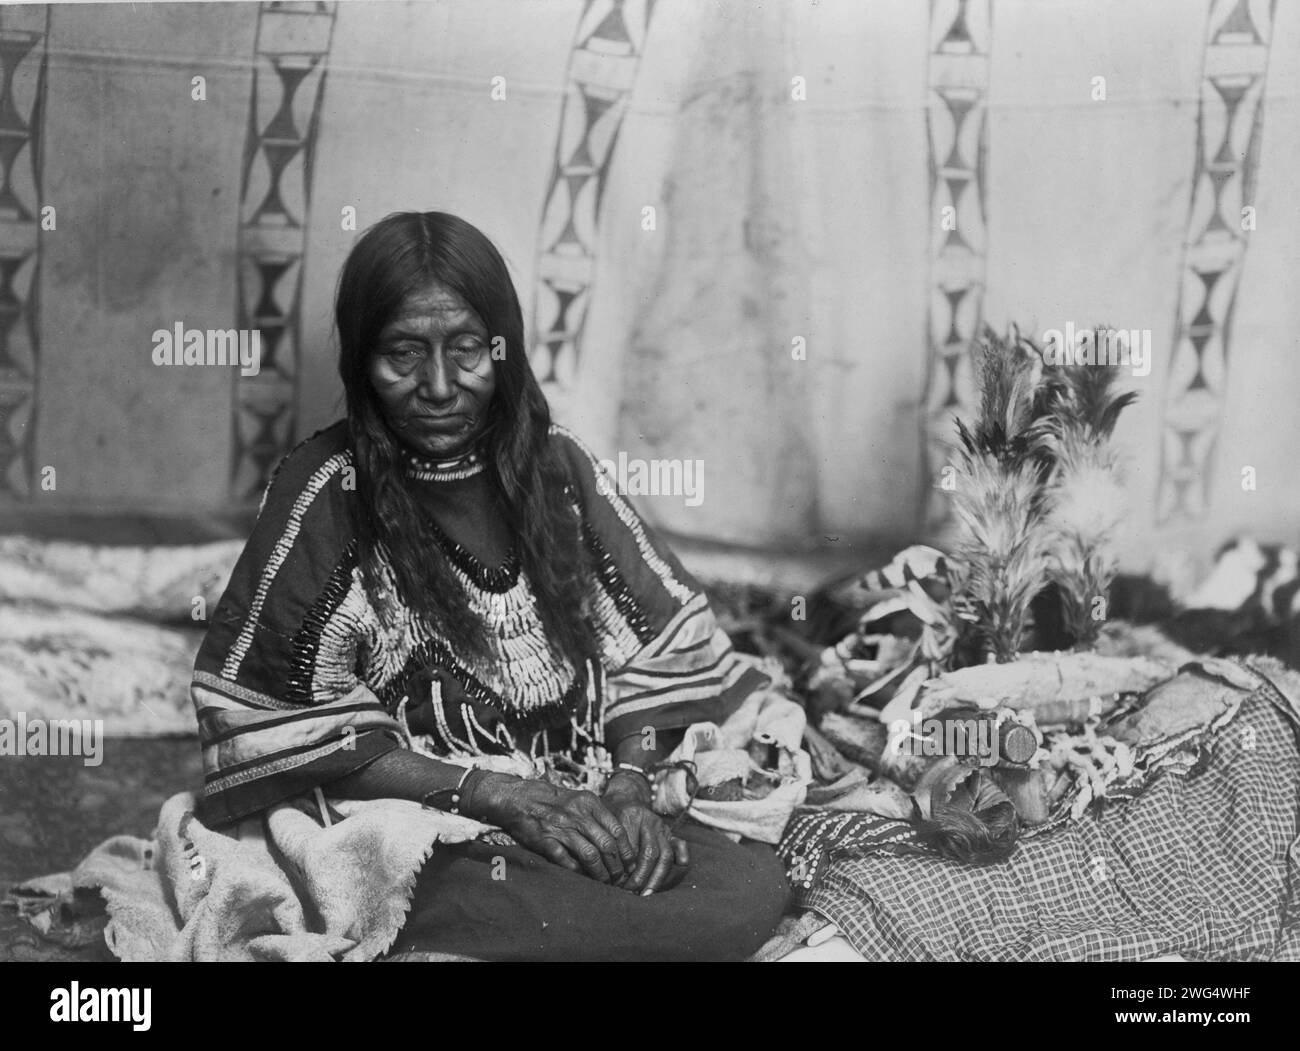 Two Kill, c1910. Piegan woman, full-length portrait, seated on blankets inside tipi(?), facing front. Stock Photo